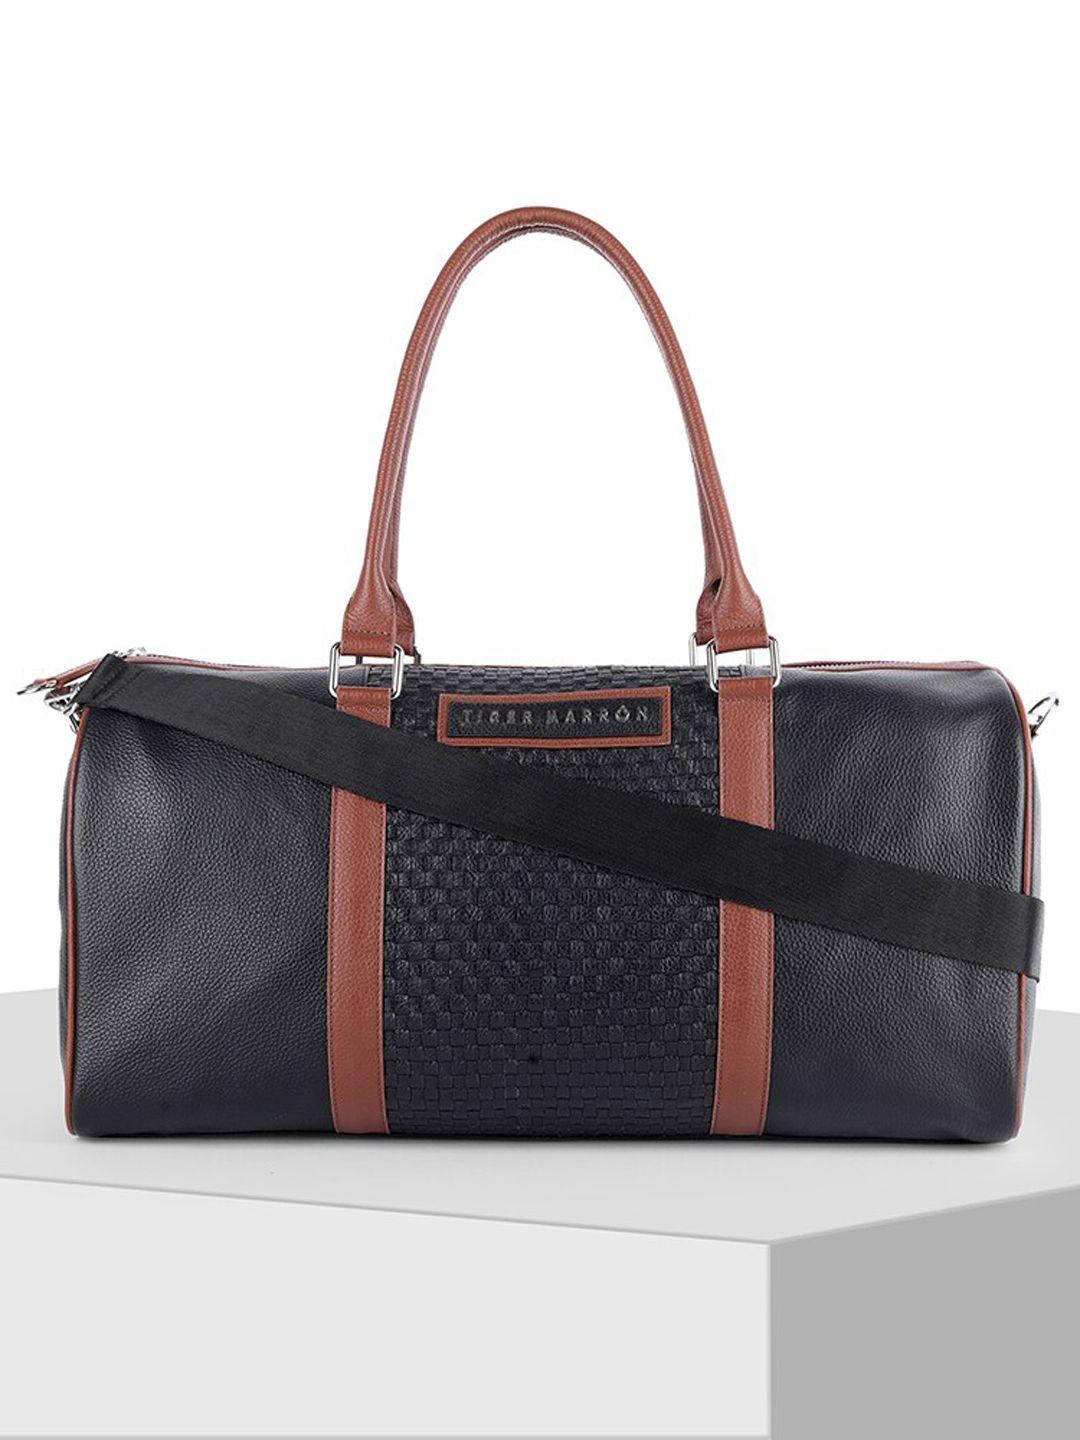 tiger marron textured leather duffle bag